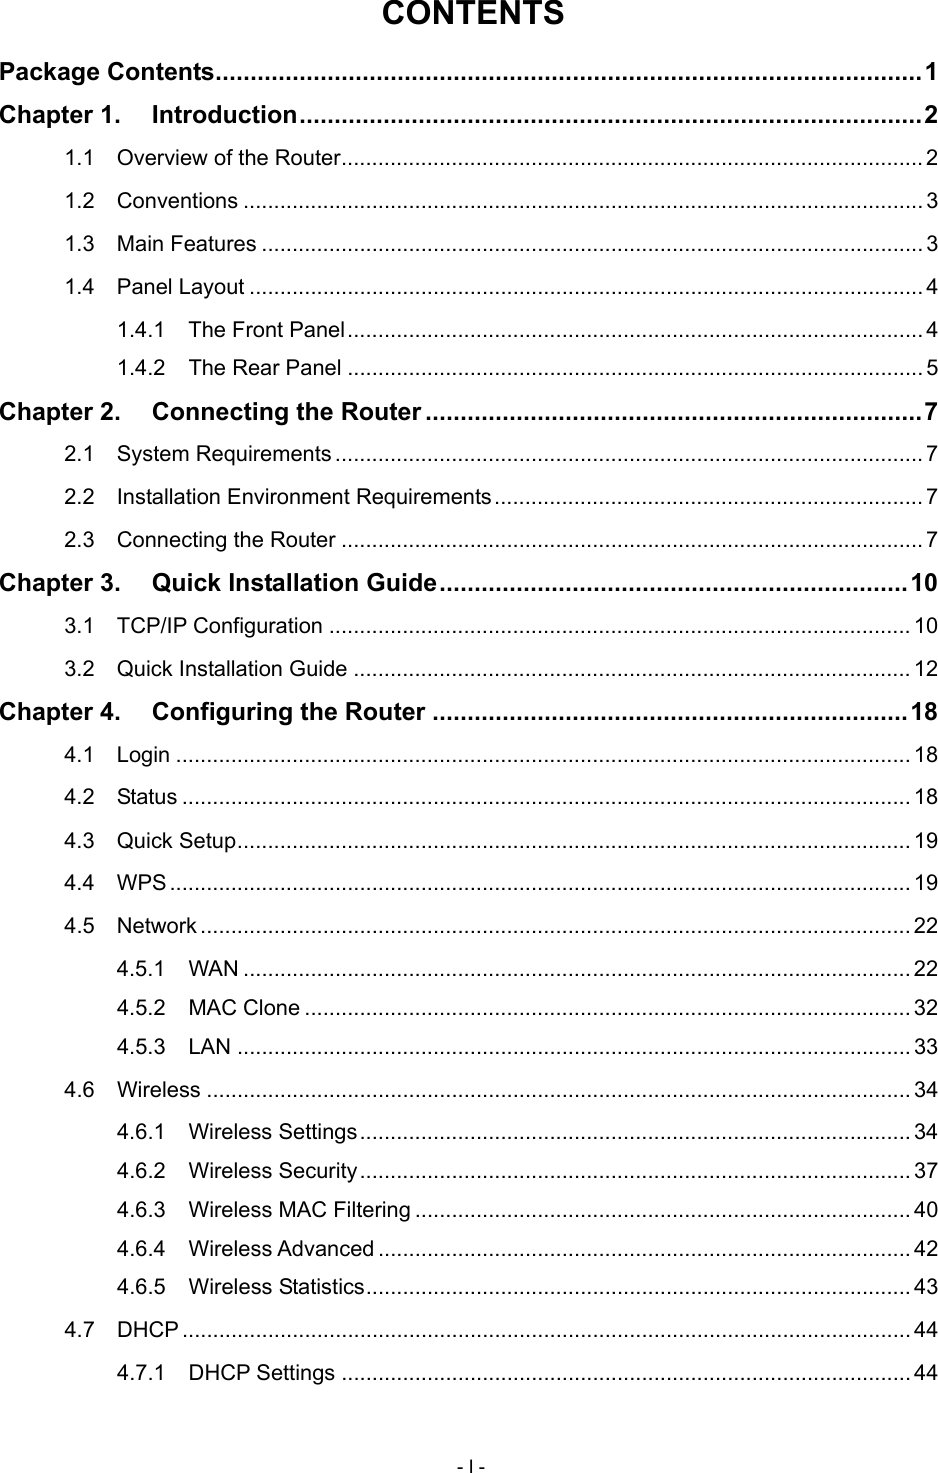  CONTENTS Package Contents.....................................................................................................1 Chapter 1. Introduction.........................................................................................2 1.1 Overview of the Router...............................................................................................2 1.2 Conventions ...............................................................................................................3 1.3 Main Features ............................................................................................................ 3 1.4 Panel Layout .............................................................................................................. 4 1.4.1 The Front Panel..............................................................................................4 1.4.2 The Rear Panel ..............................................................................................5 Chapter 2. Connecting the Router .......................................................................7 2.1 System Requirements ................................................................................................ 7 2.2 Installation Environment Requirements......................................................................7 2.3 Connecting the Router ............................................................................................... 7 Chapter 3. Quick Installation Guide...................................................................10 3.1 TCP/IP Configuration ............................................................................................... 10 3.2 Quick Installation Guide ........................................................................................... 12 Chapter 4. Configuring the Router ....................................................................18 4.1 Login ........................................................................................................................ 18 4.2 Status ....................................................................................................................... 18 4.3 Quick Setup.............................................................................................................. 19 4.4 WPS......................................................................................................................... 19 4.5 Network .................................................................................................................... 22 4.5.1 WAN ............................................................................................................. 22 4.5.2 MAC Clone ................................................................................................... 32 4.5.3 LAN .............................................................................................................. 33 4.6 Wireless ................................................................................................................... 34 4.6.1 Wireless Settings.......................................................................................... 34 4.6.2 Wireless Security.......................................................................................... 37 4.6.3 Wireless MAC Filtering ................................................................................. 40 4.6.4 Wireless Advanced ....................................................................................... 42 4.6.5 Wireless Statistics......................................................................................... 43 4.7 DHCP ....................................................................................................................... 44 4.7.1 DHCP Settings ............................................................................................. 44 - I - 